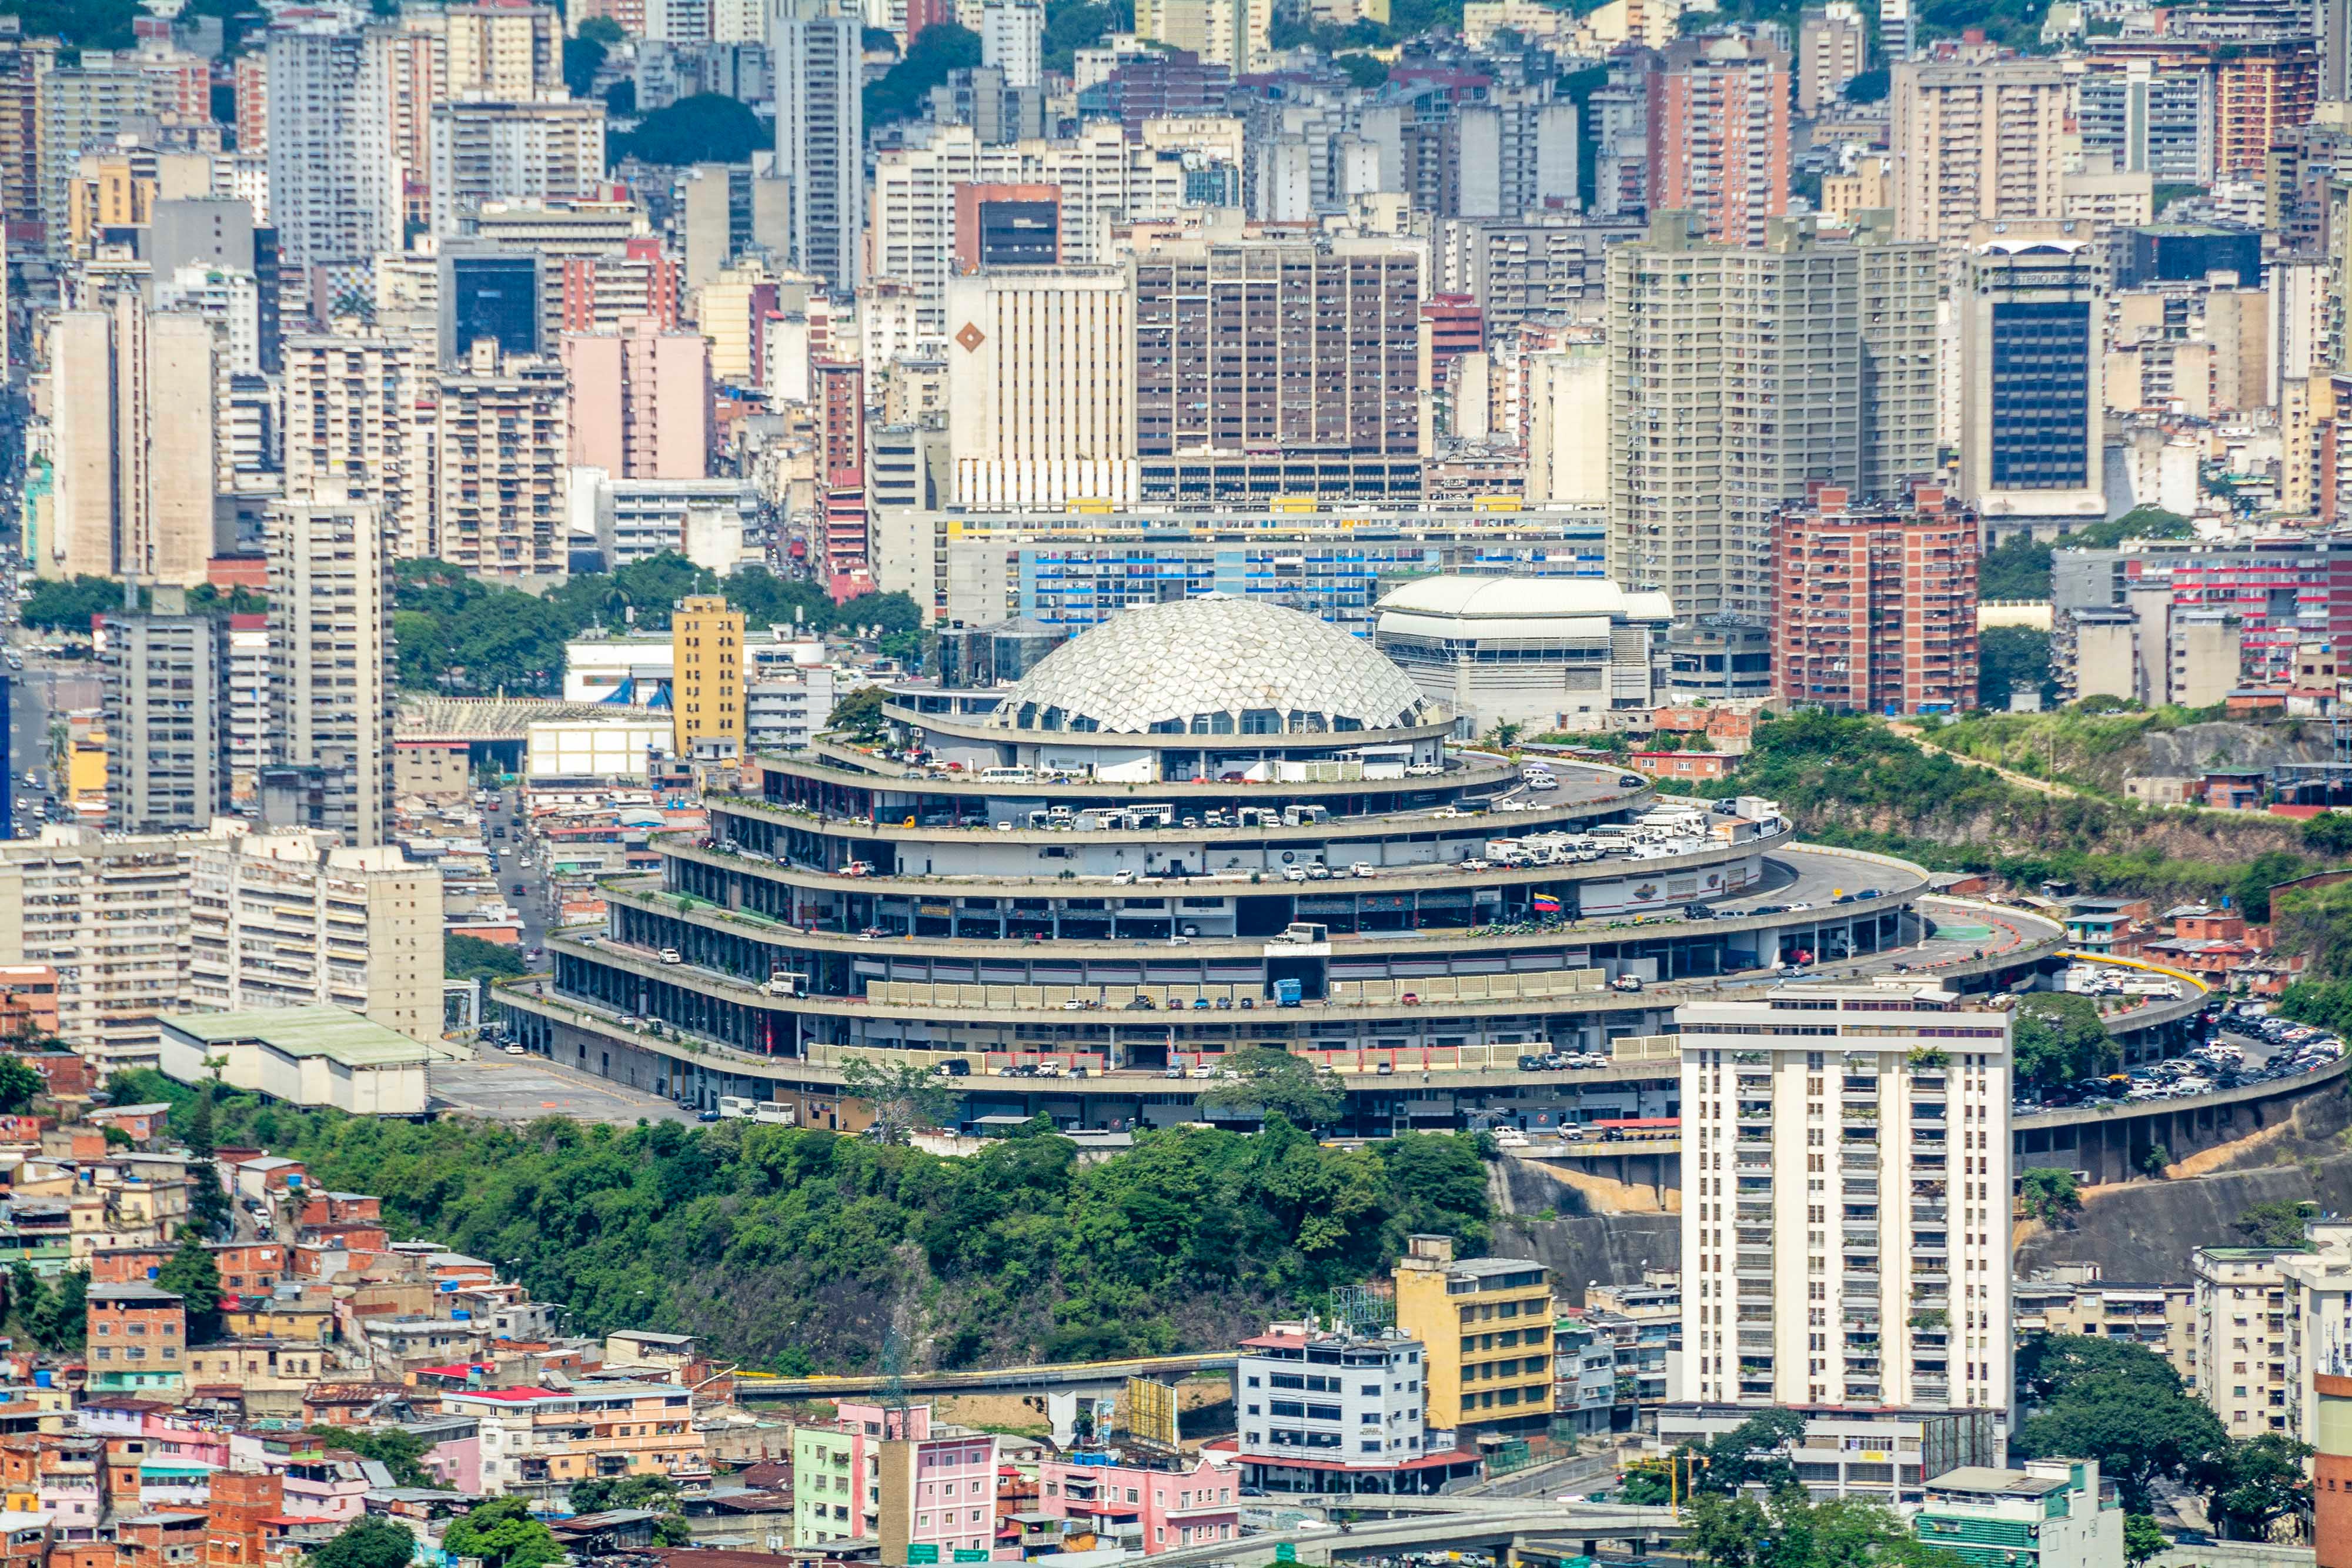 El Helicoide, a complex that functions as the headquarters of the Bolivarian National Intelligence Service (SEBIN) and a prison where many political prisoners are held, in Caracas, Venezuela.